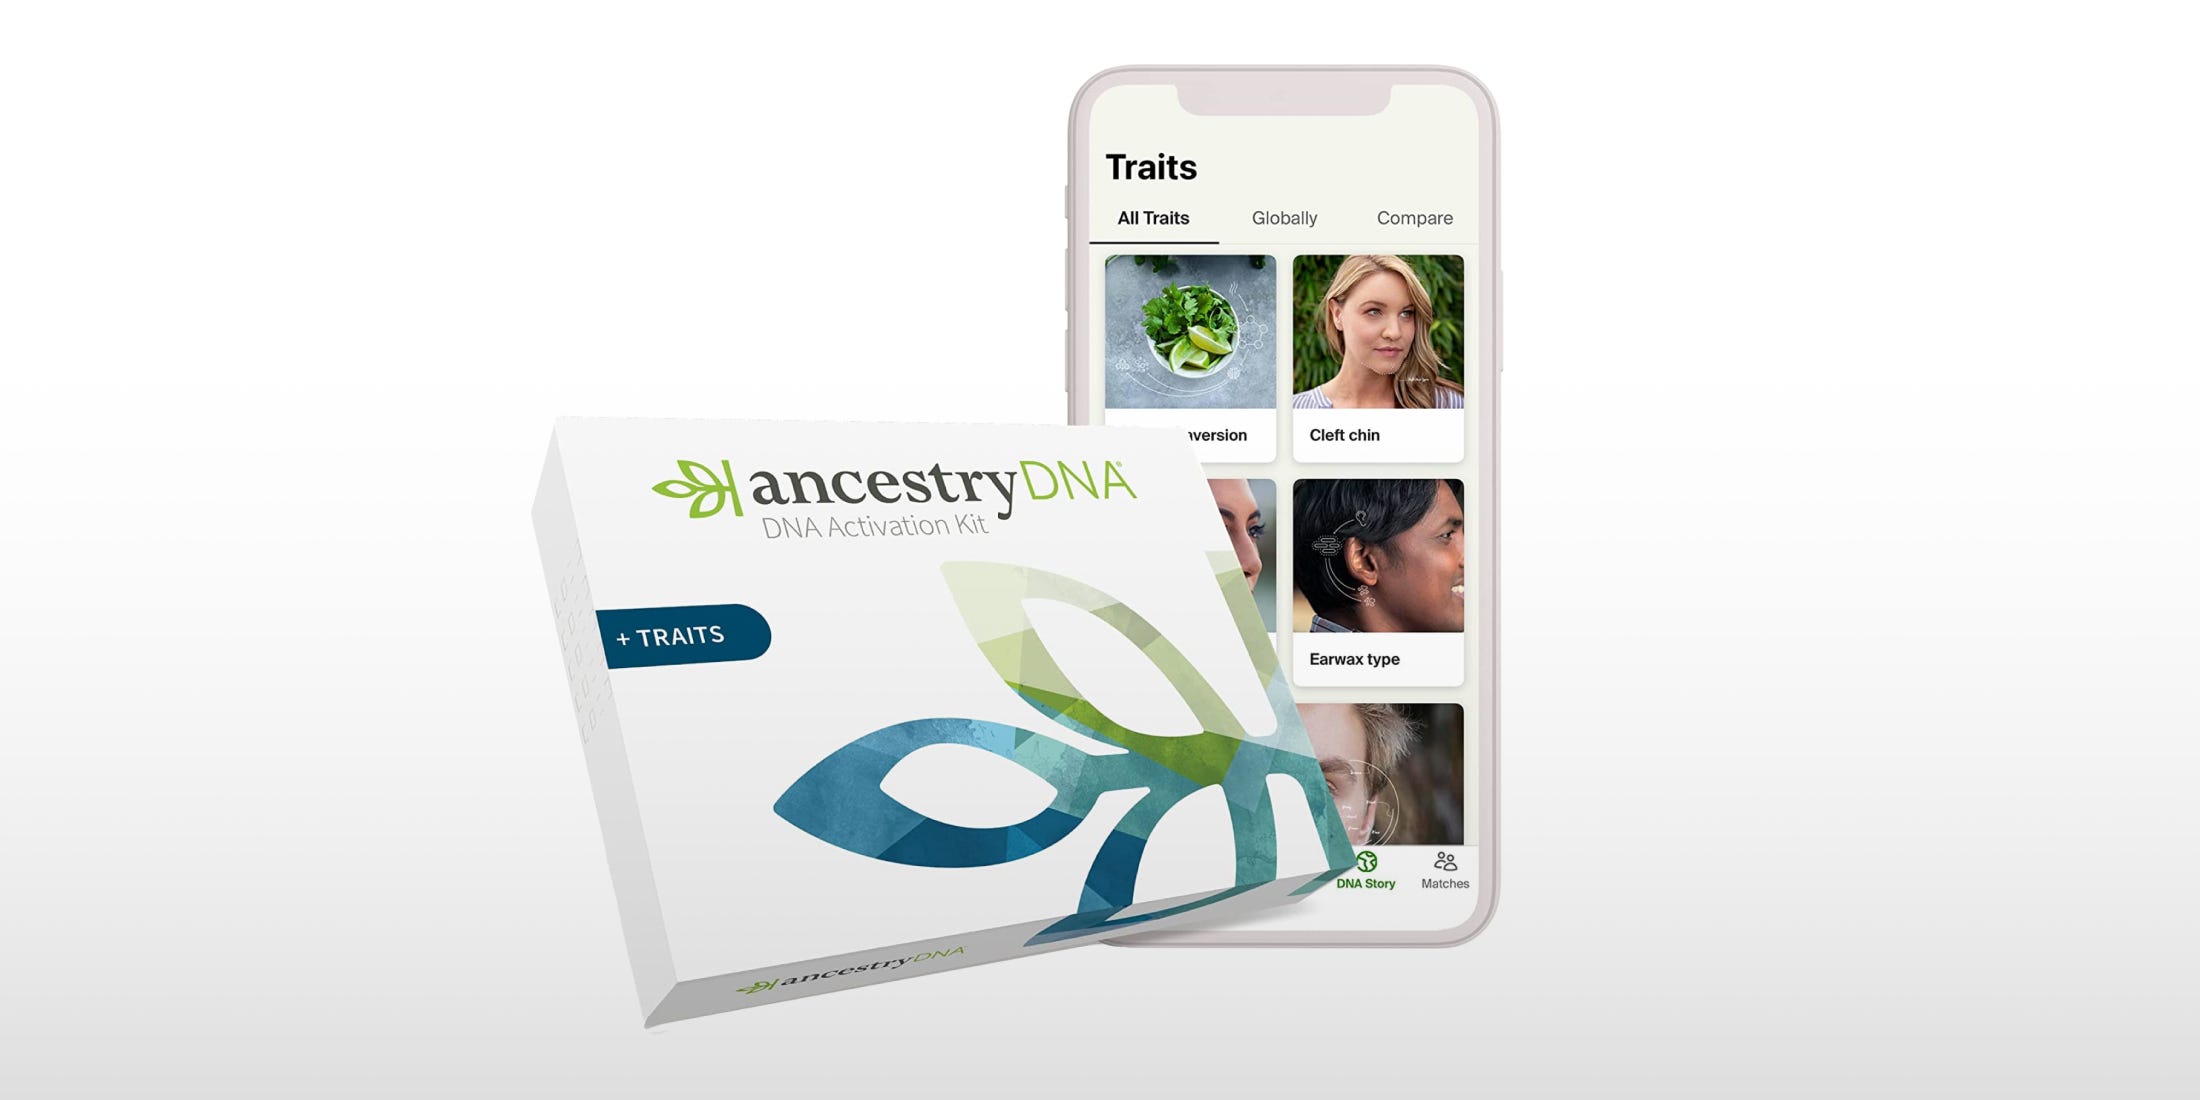 A phone in the background with the Ancestry app open showing two rows of photos depicting a list of traits to choose from including a cleft chin and earwax type. In the foreground the Ancestry DNA Activation Kit is angled slightly and covering the lower left hand part of the phone.